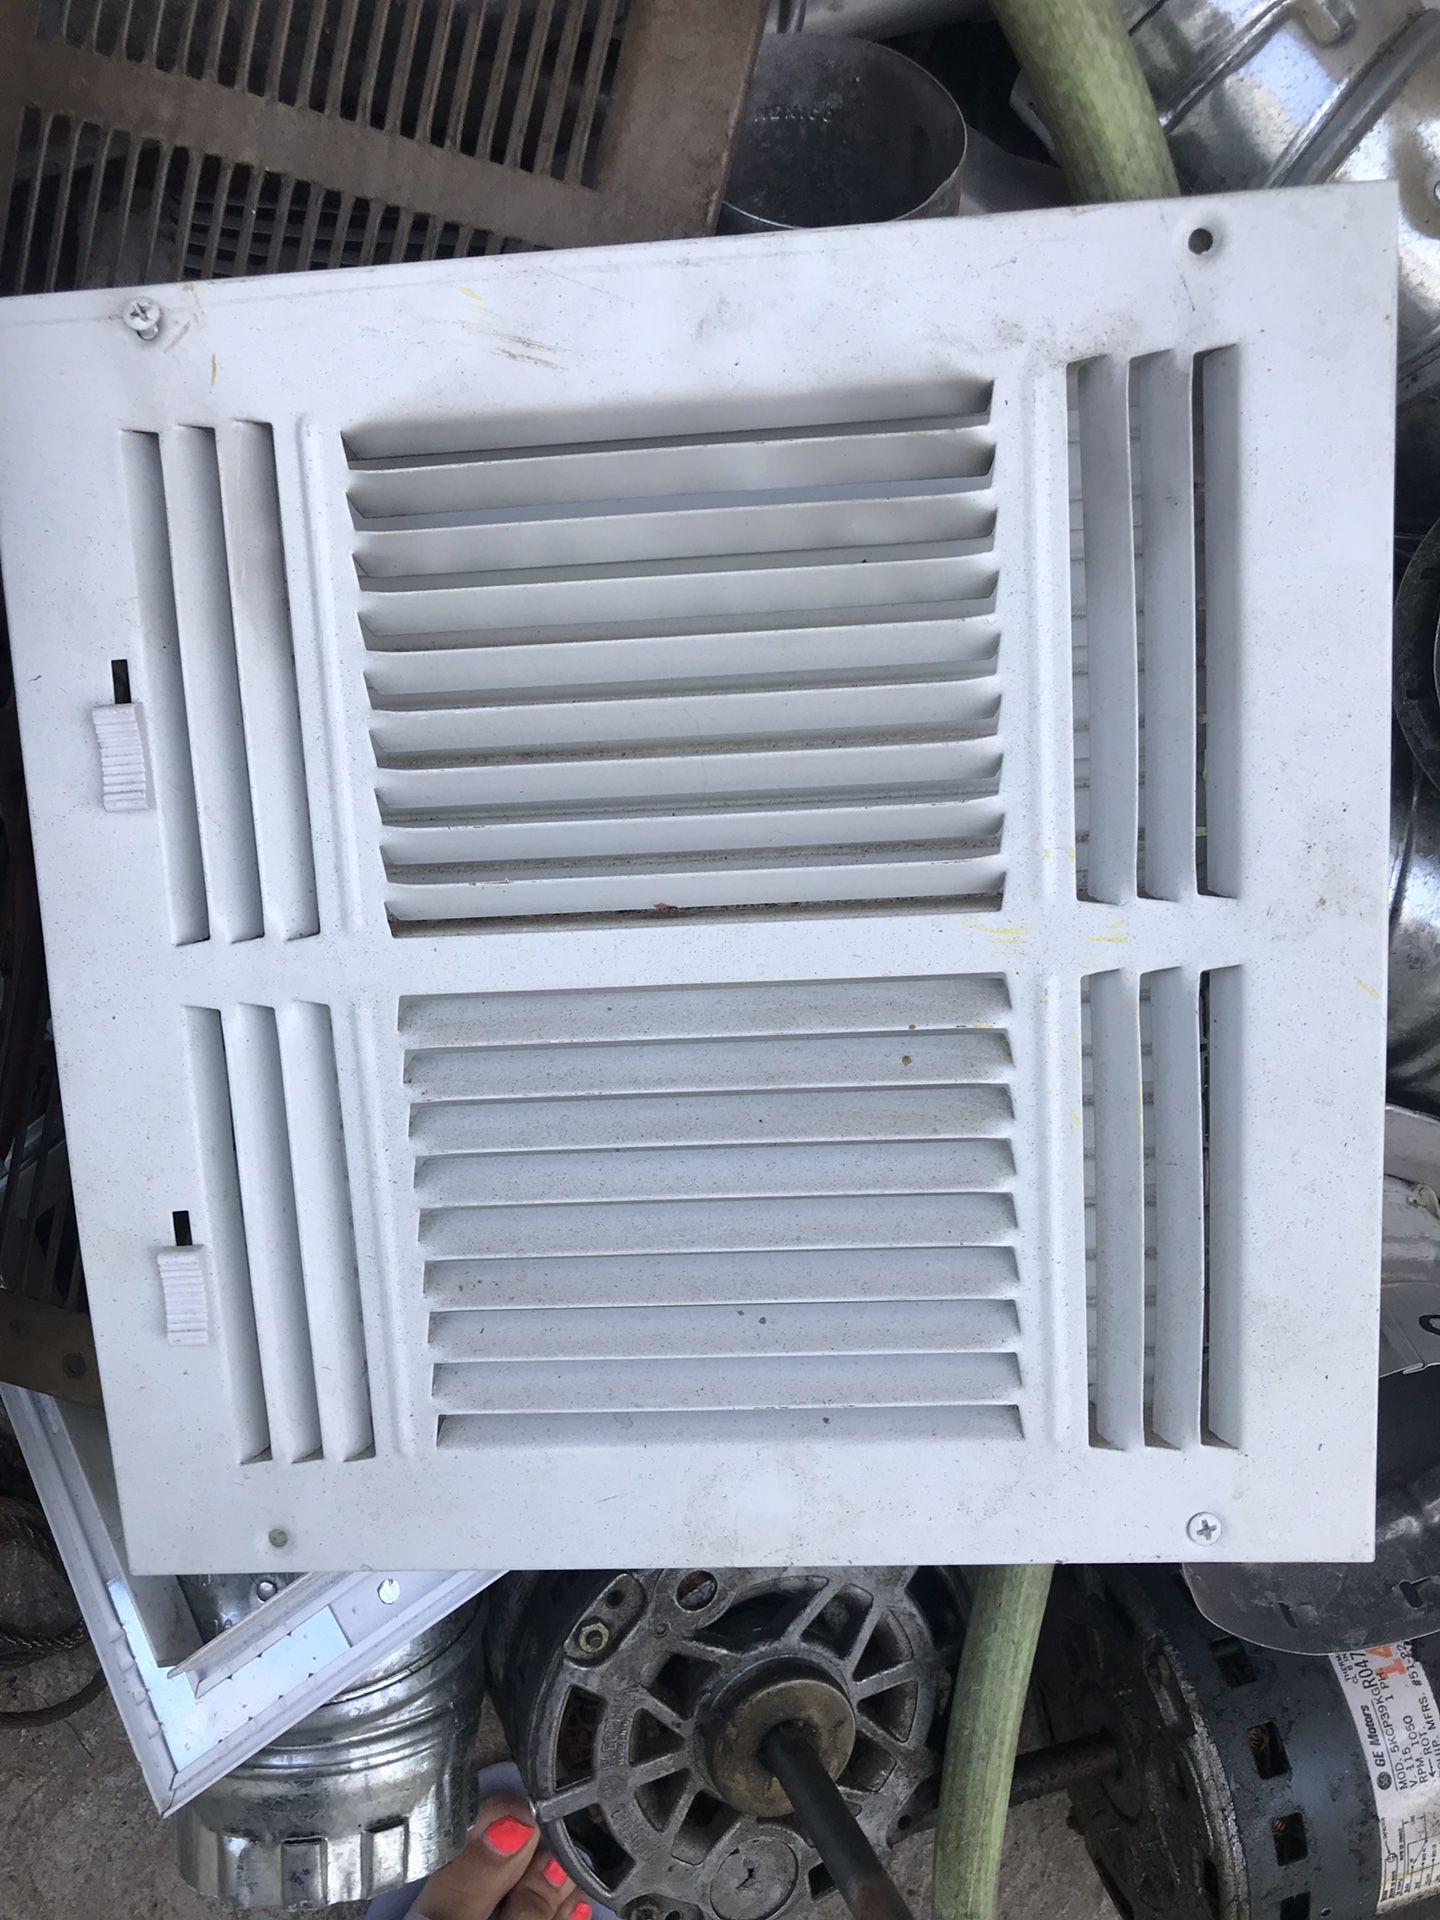 Air conditioning vent cover